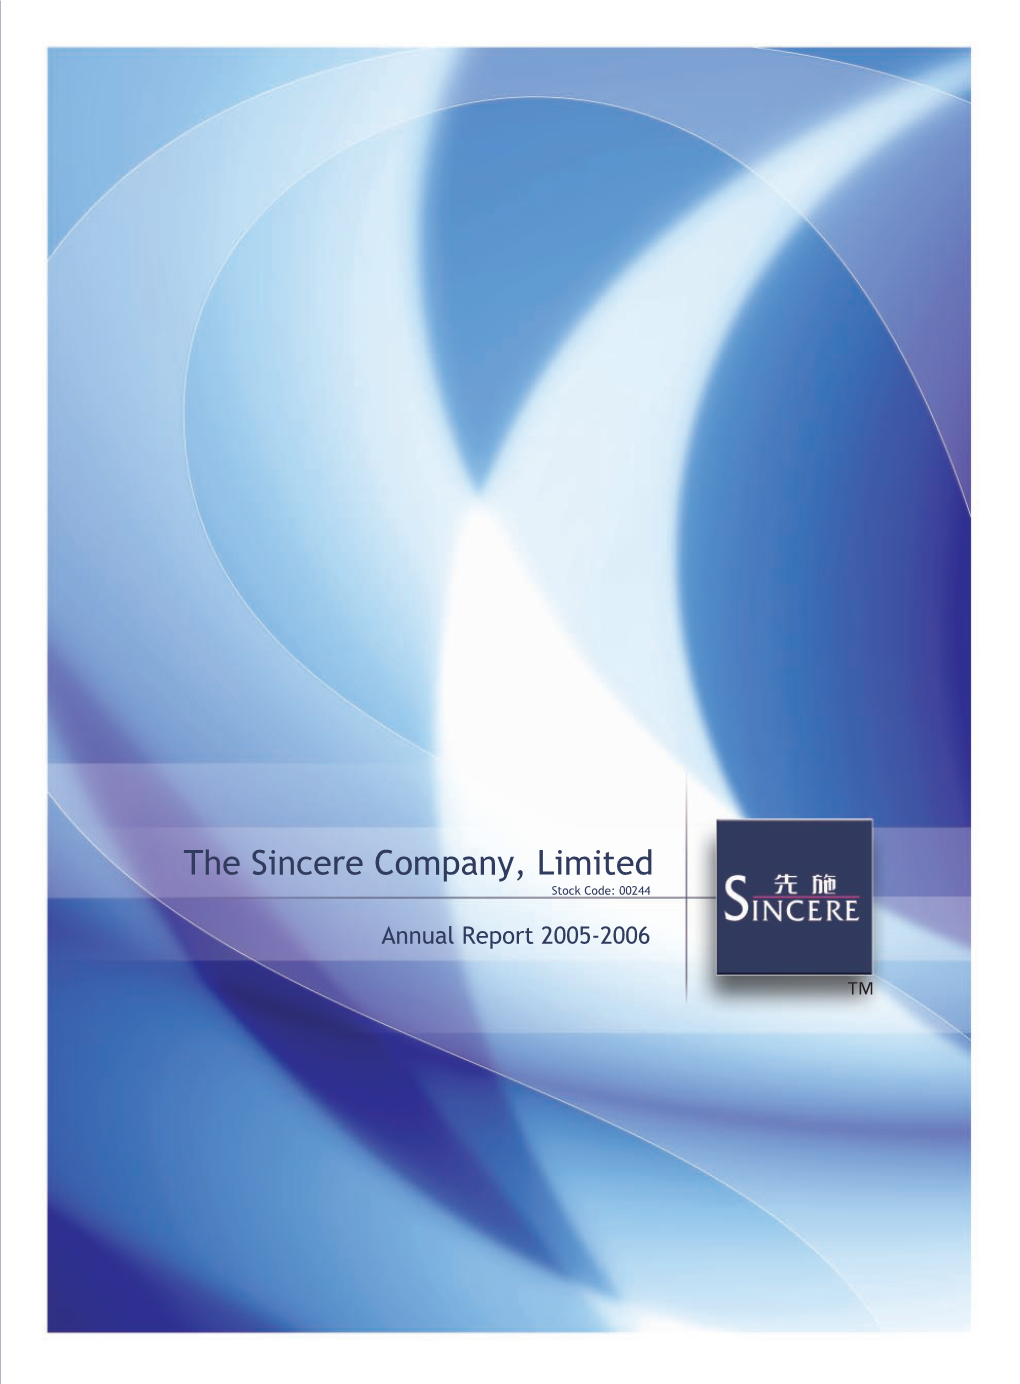 The Sincere Company, Limited • Annual Report 2005-06